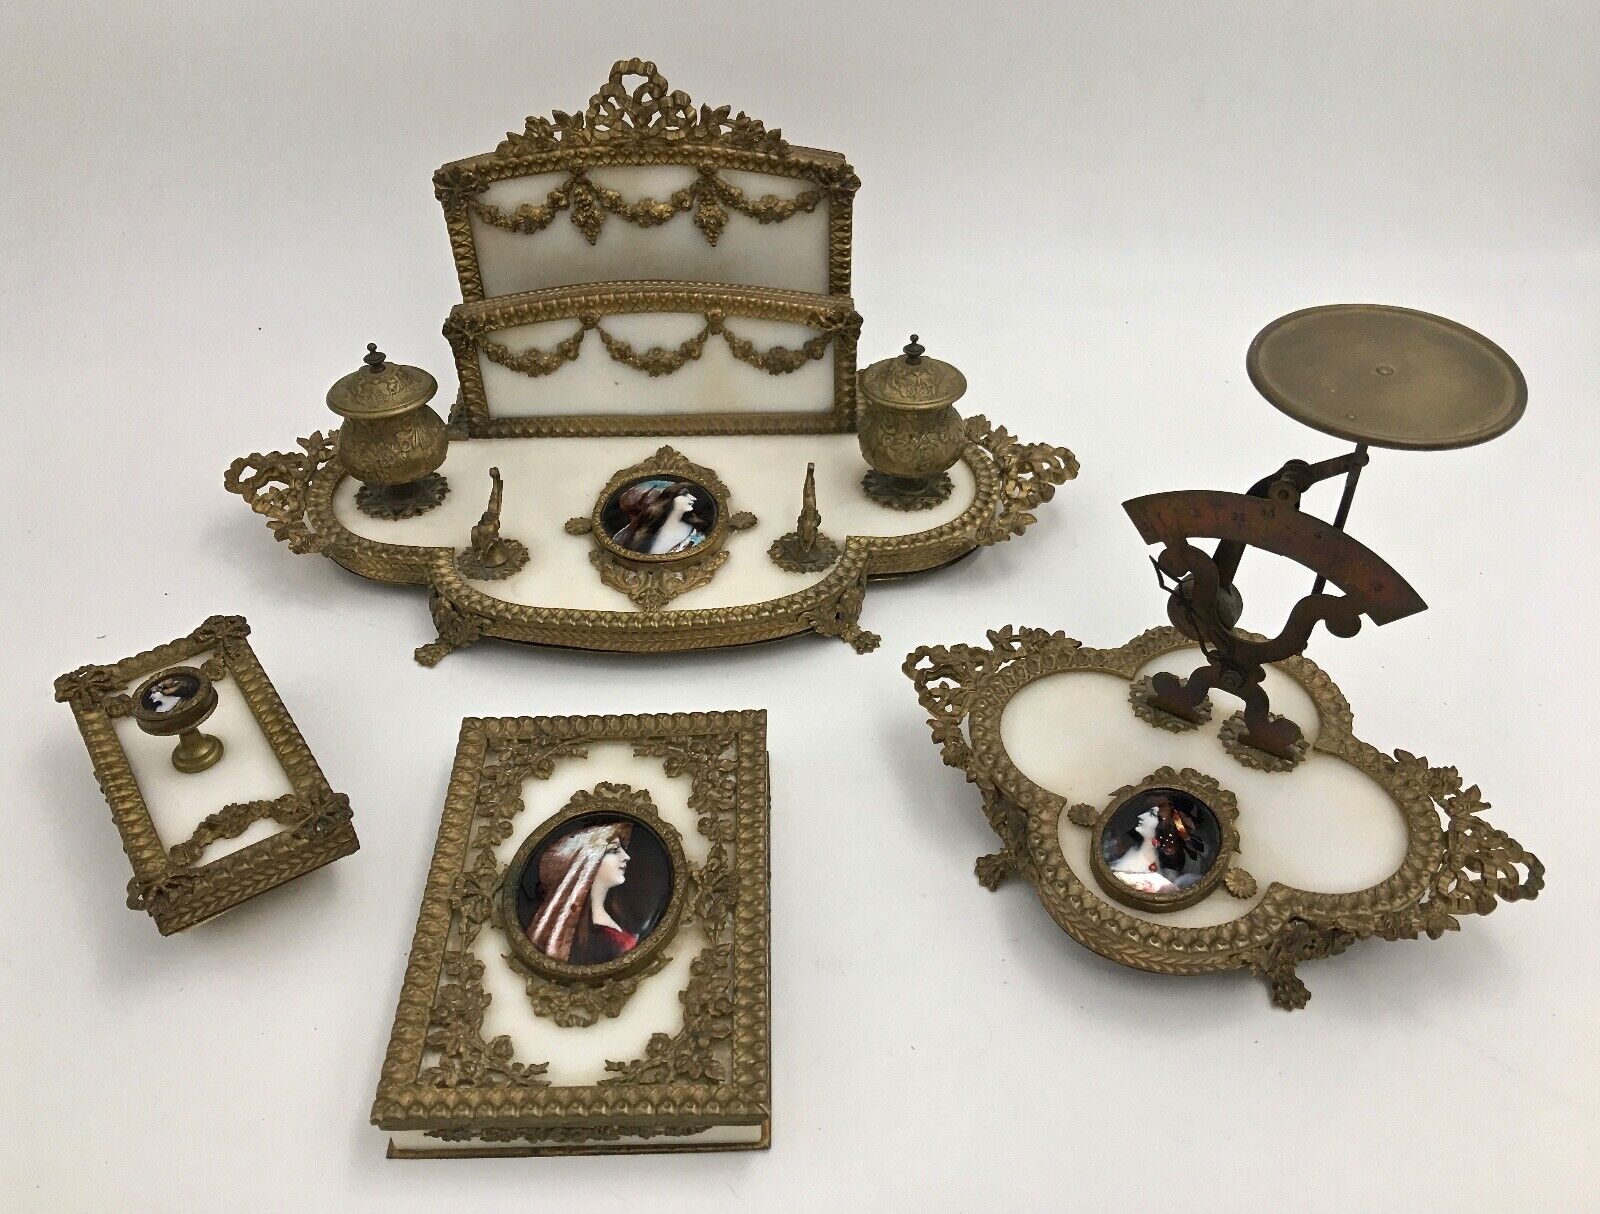 19th Century French Empire Marble and Enameled Portrait Gilt Desk Set  